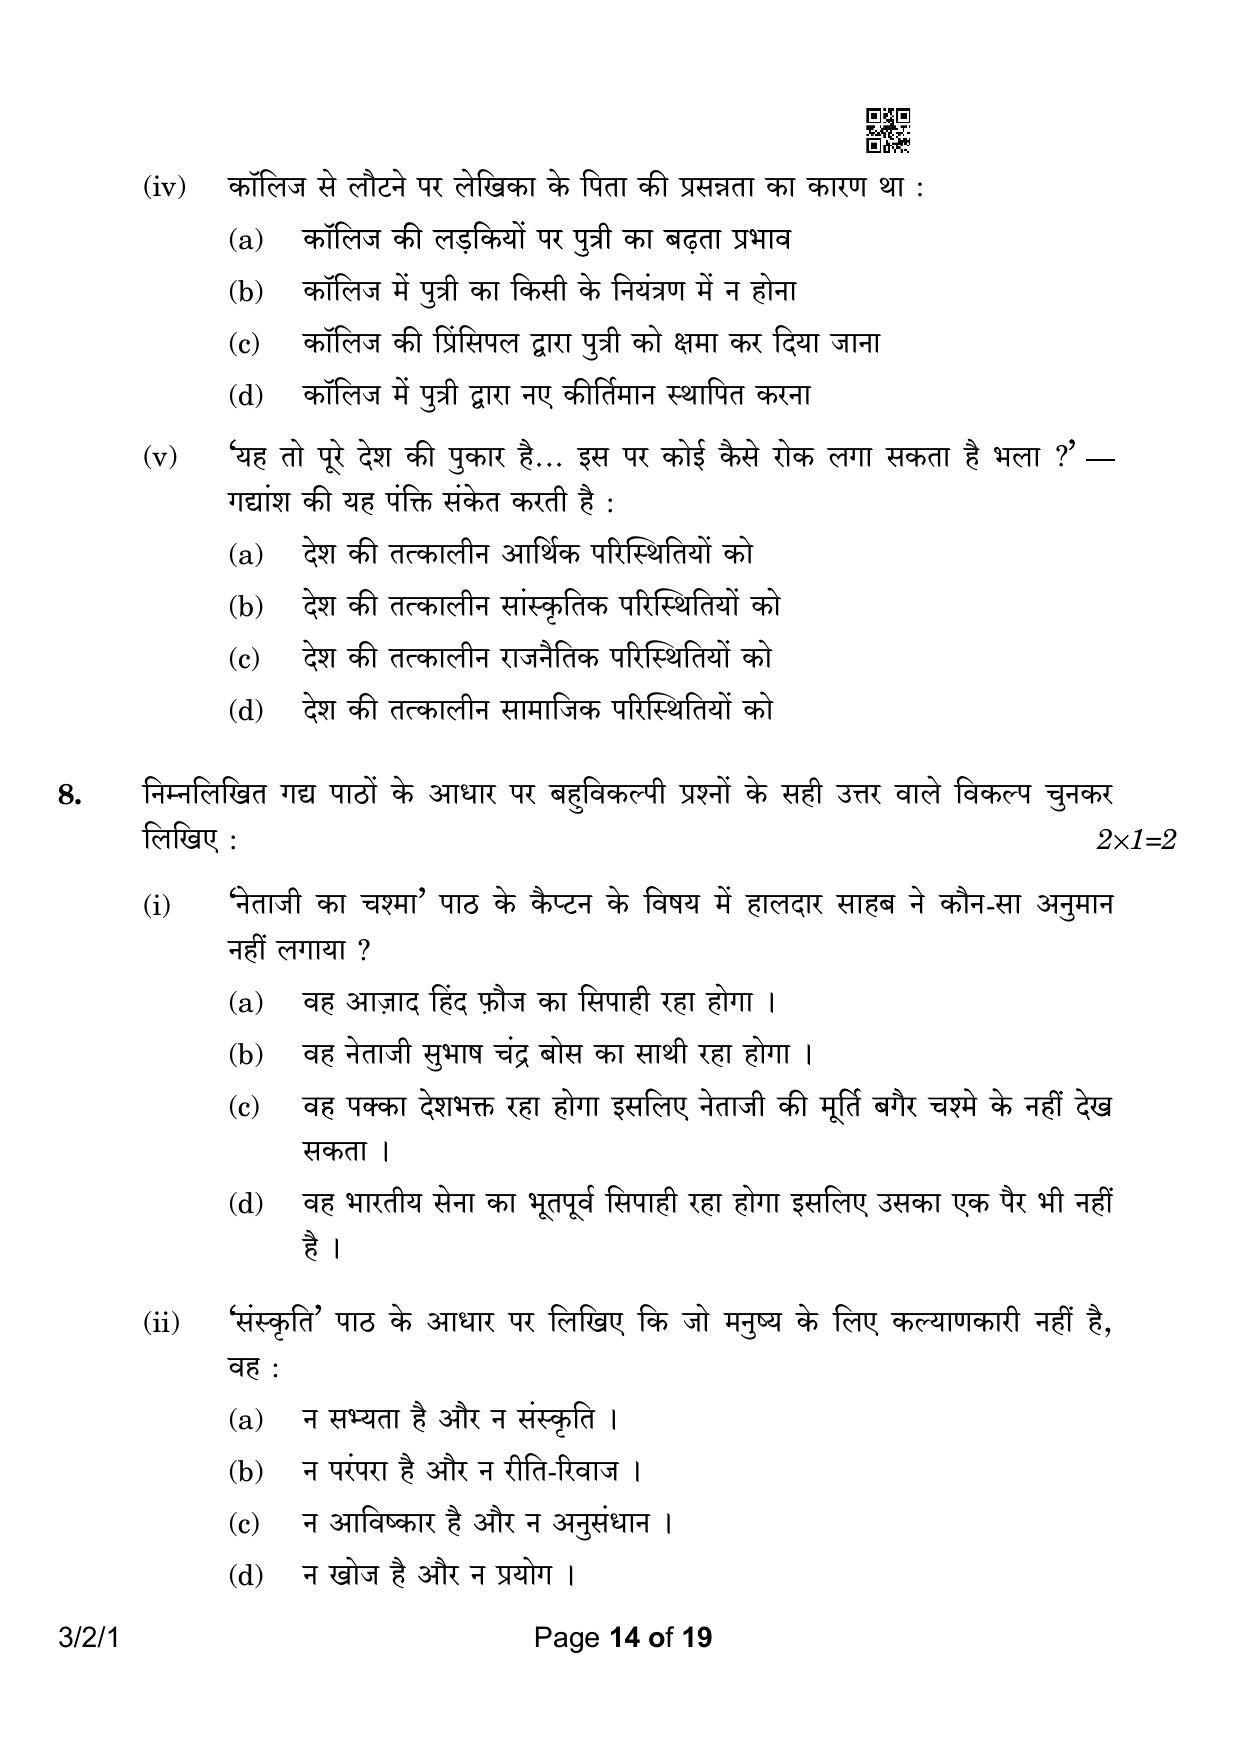 CBSE Class 10 3-2-1 Hindi A 2023 Question Paper - Page 14